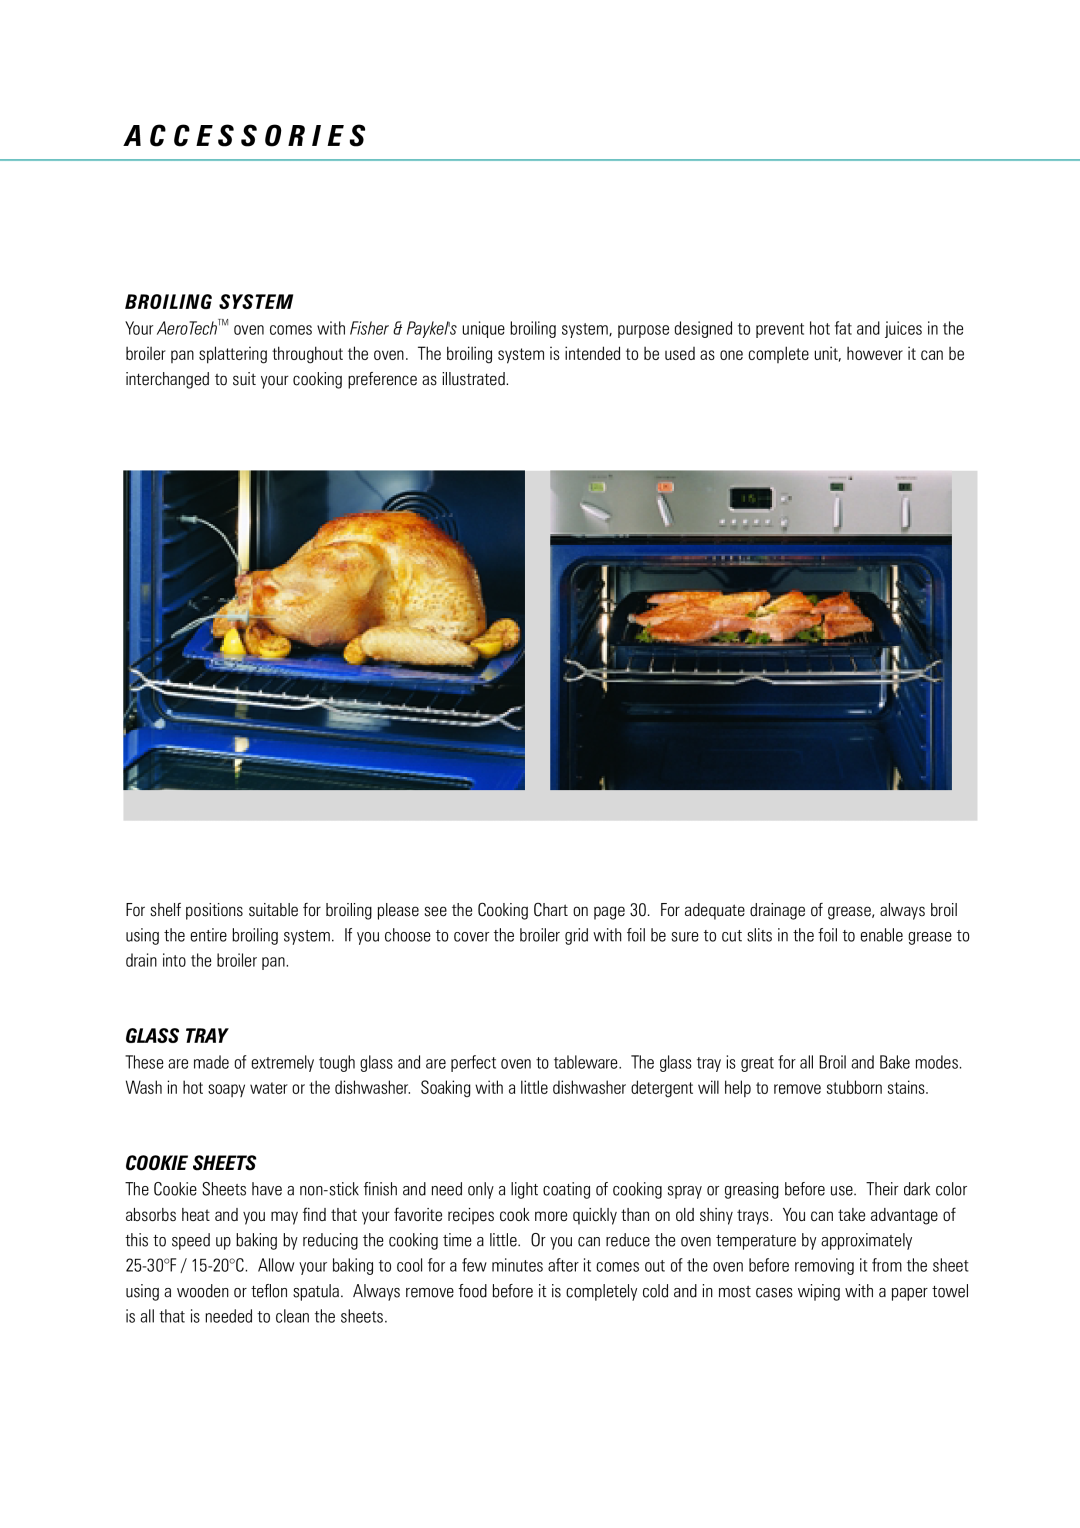 Fisher & Paykel AeroTech manual A C C E S S O R I E S, Broiling System, Glass Tray, Cookie Sheets 